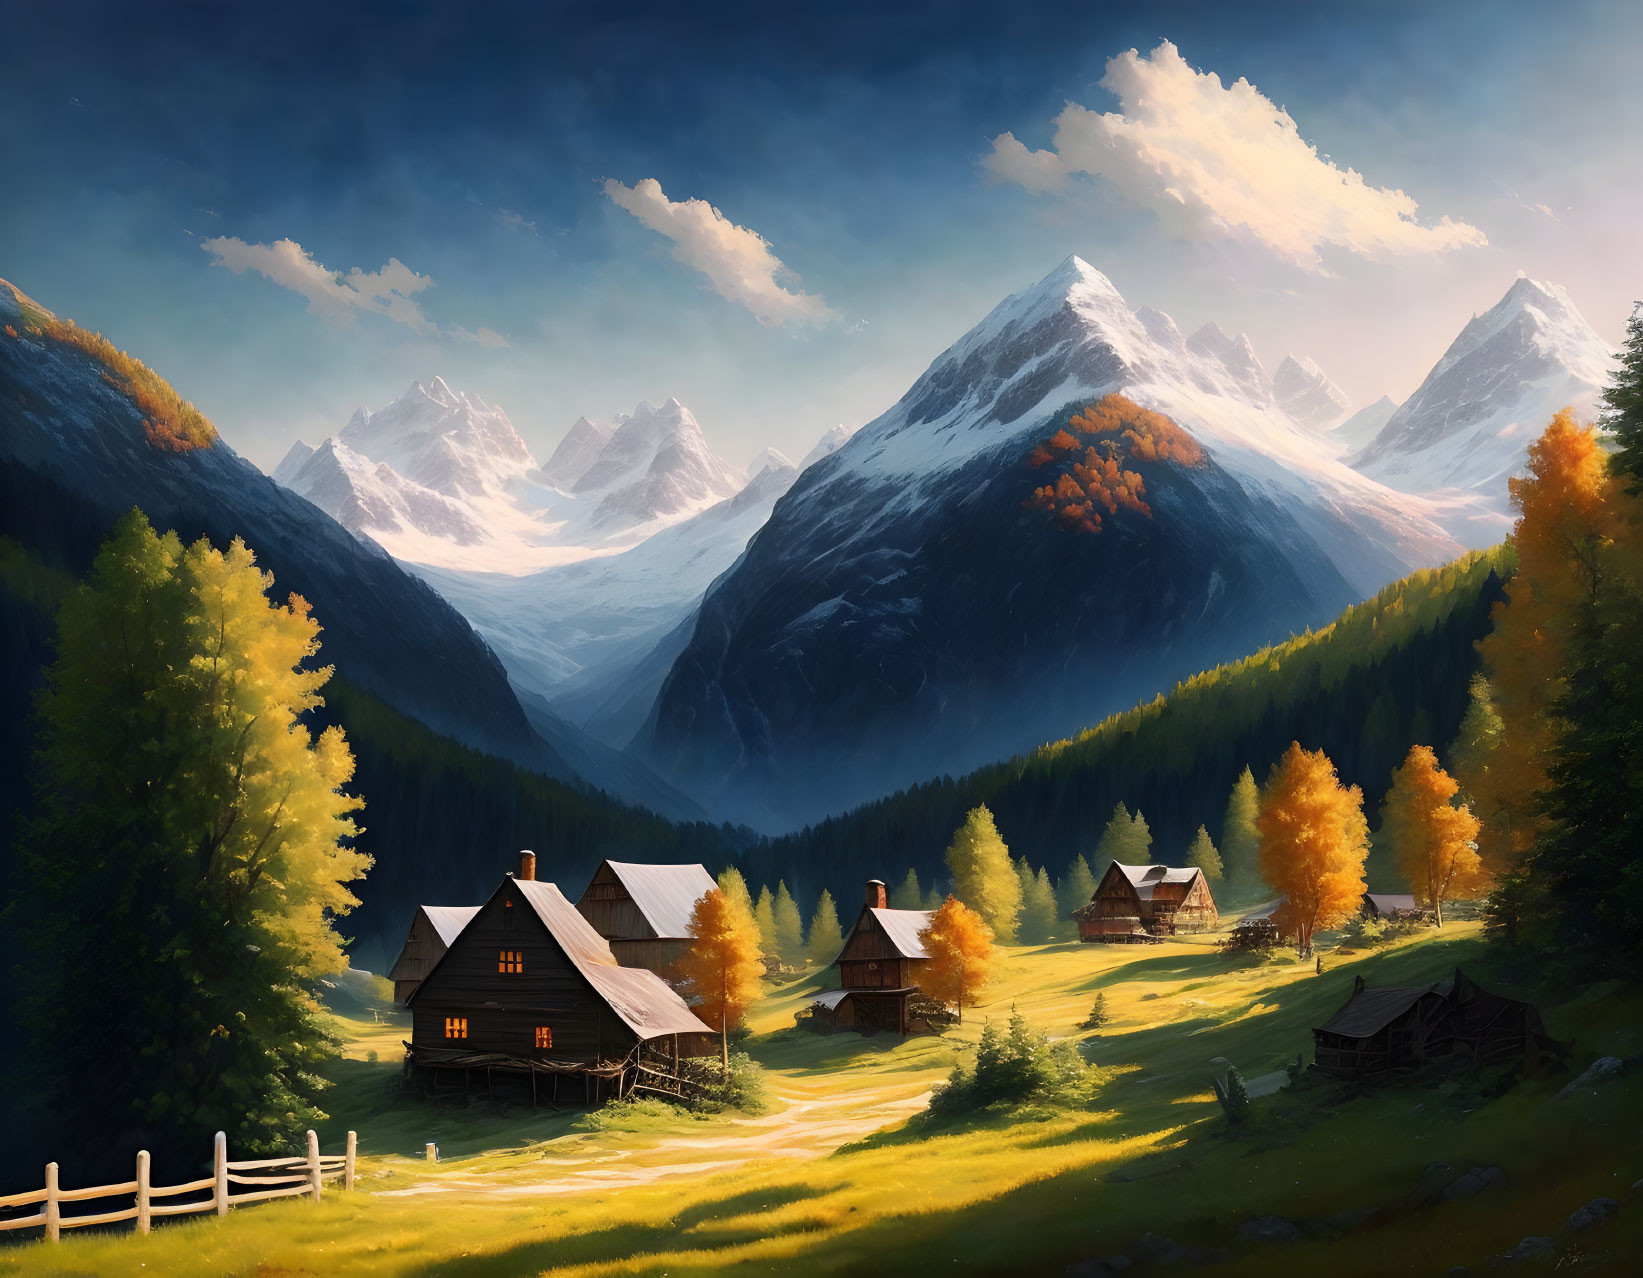 Tranquil autumn landscape with cabins, colorful trees, wooden fence, and snow-capped mountains.